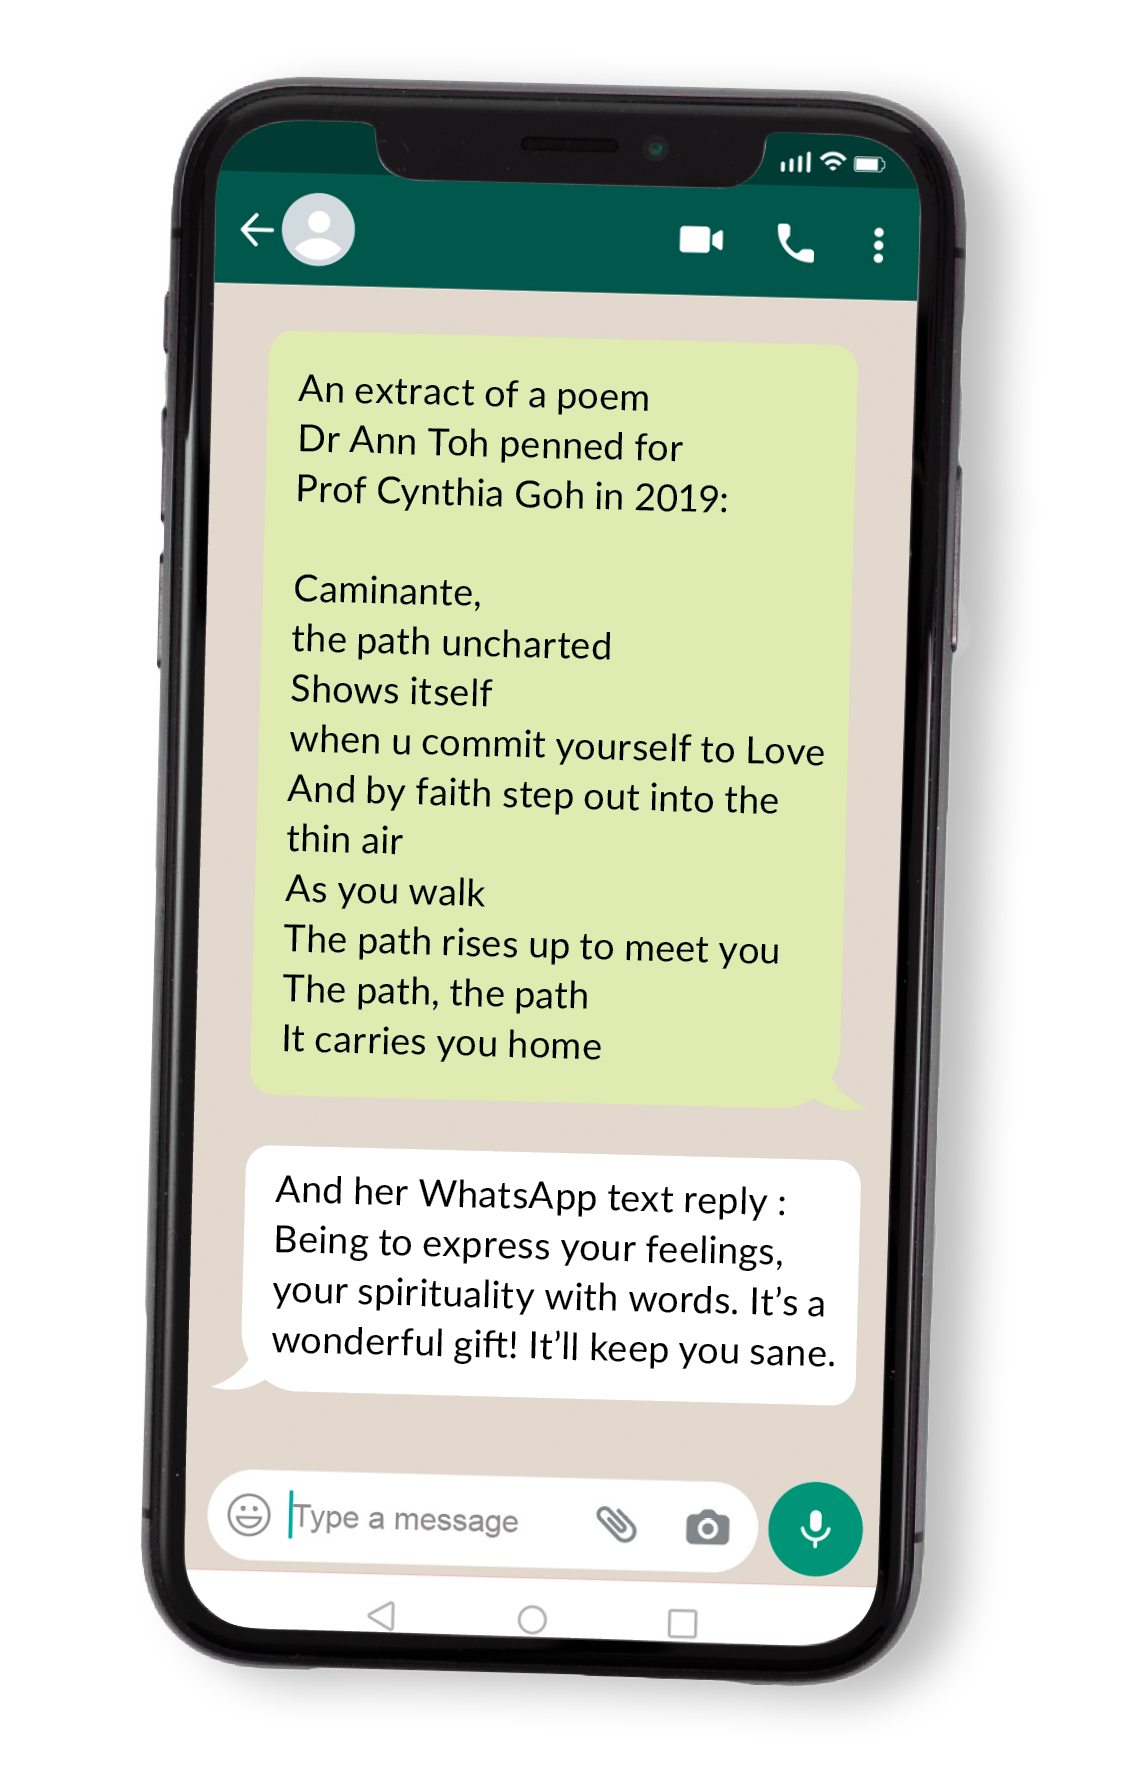 A smartphone with its screen similar to a WhatsApp message, showing an extract of a poem Dr Ann Toh penned for Prof Cynthia Goh in 2019.